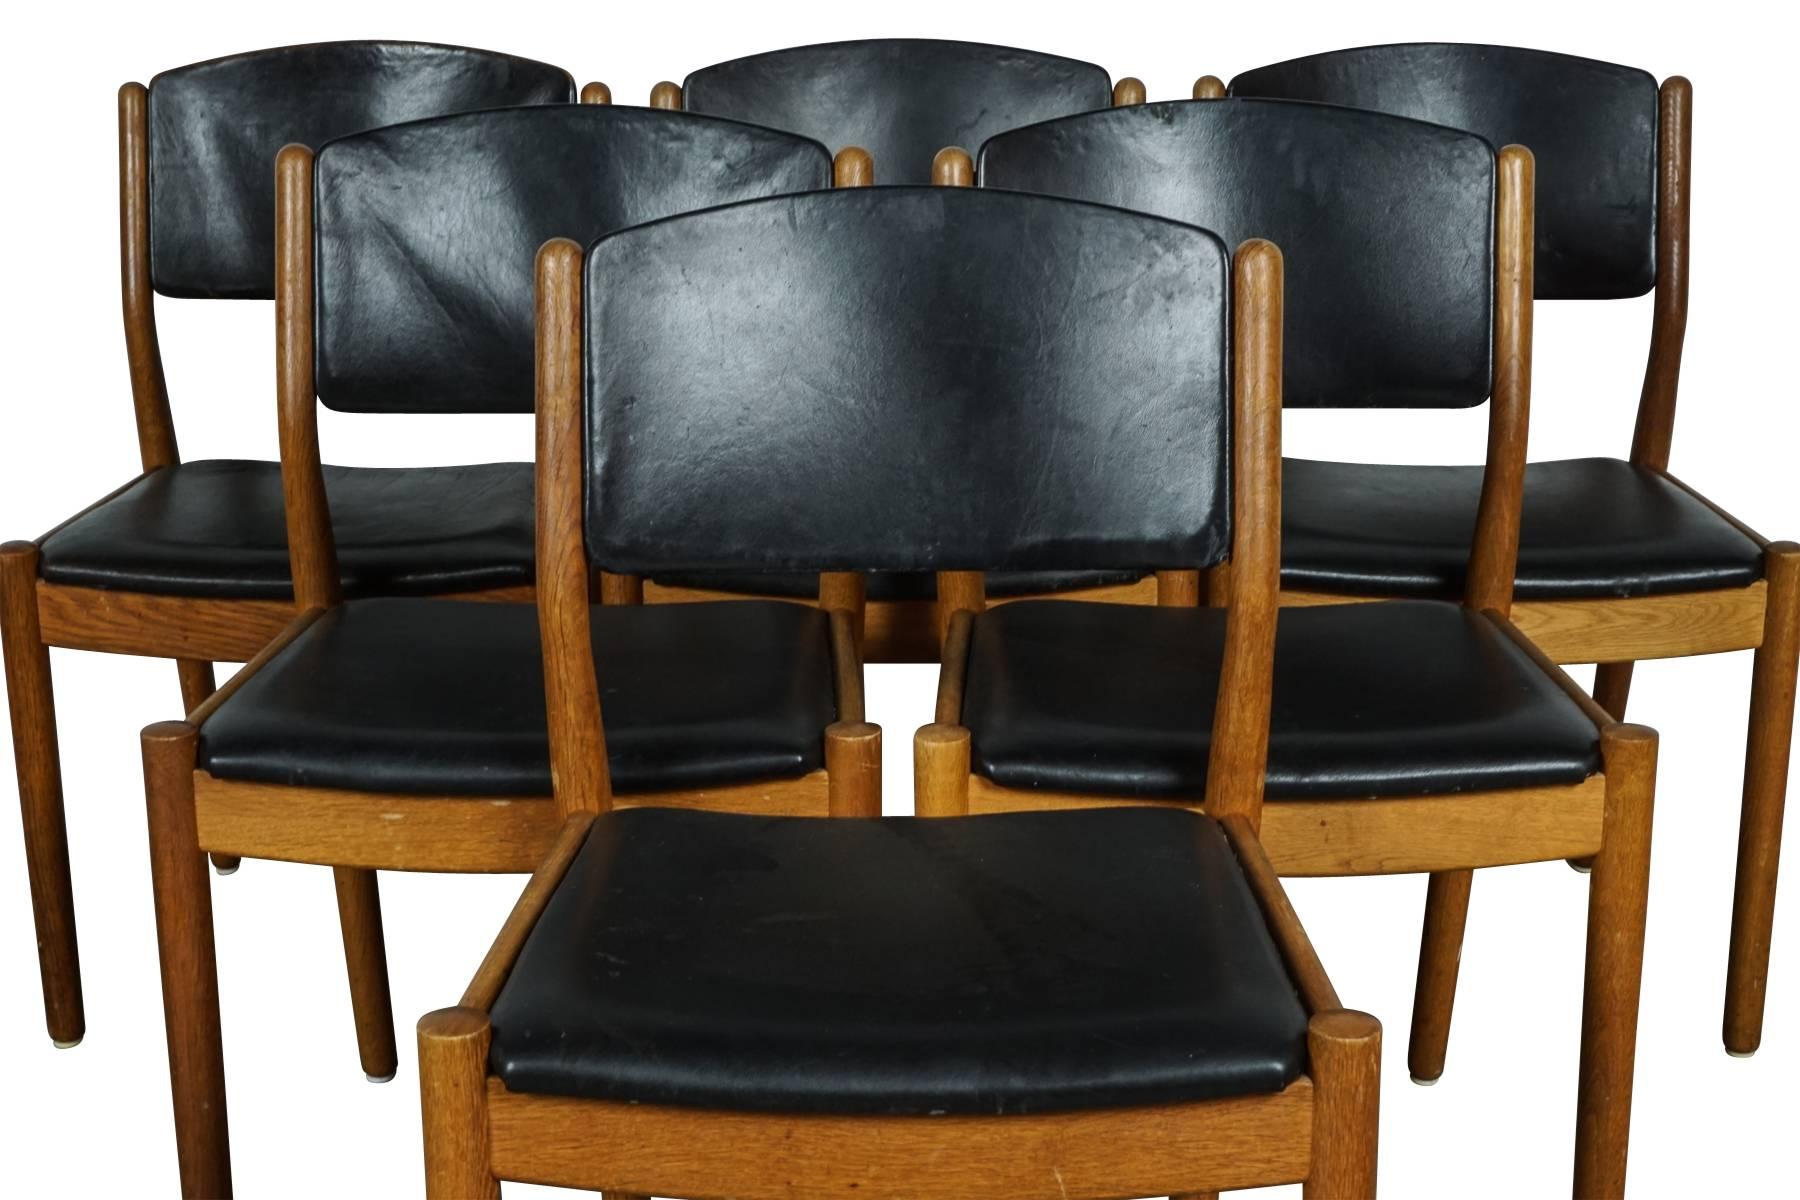 Set of six dining chairs designed by Poul M. Volther, model J61, circa 1960. Solid oak frame with black leather seats and back. Manufactured by FDB, Denmark.